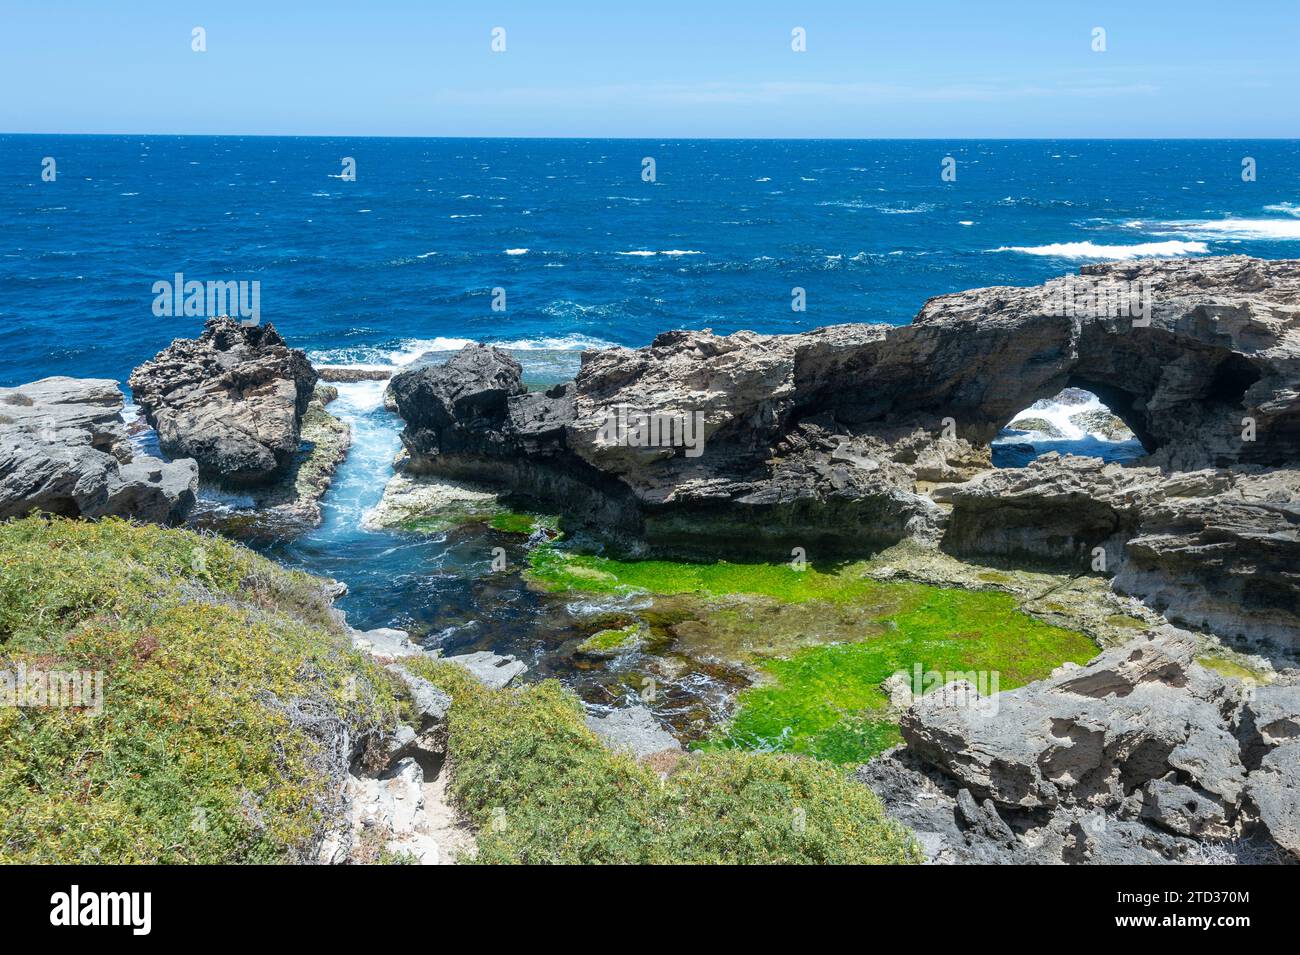 Scenic view of Cape Vlamingh and its rugged coastline, Indian Ocean, Rottnest Island or Wadjemup, Western Australia, Australia Stock Photo